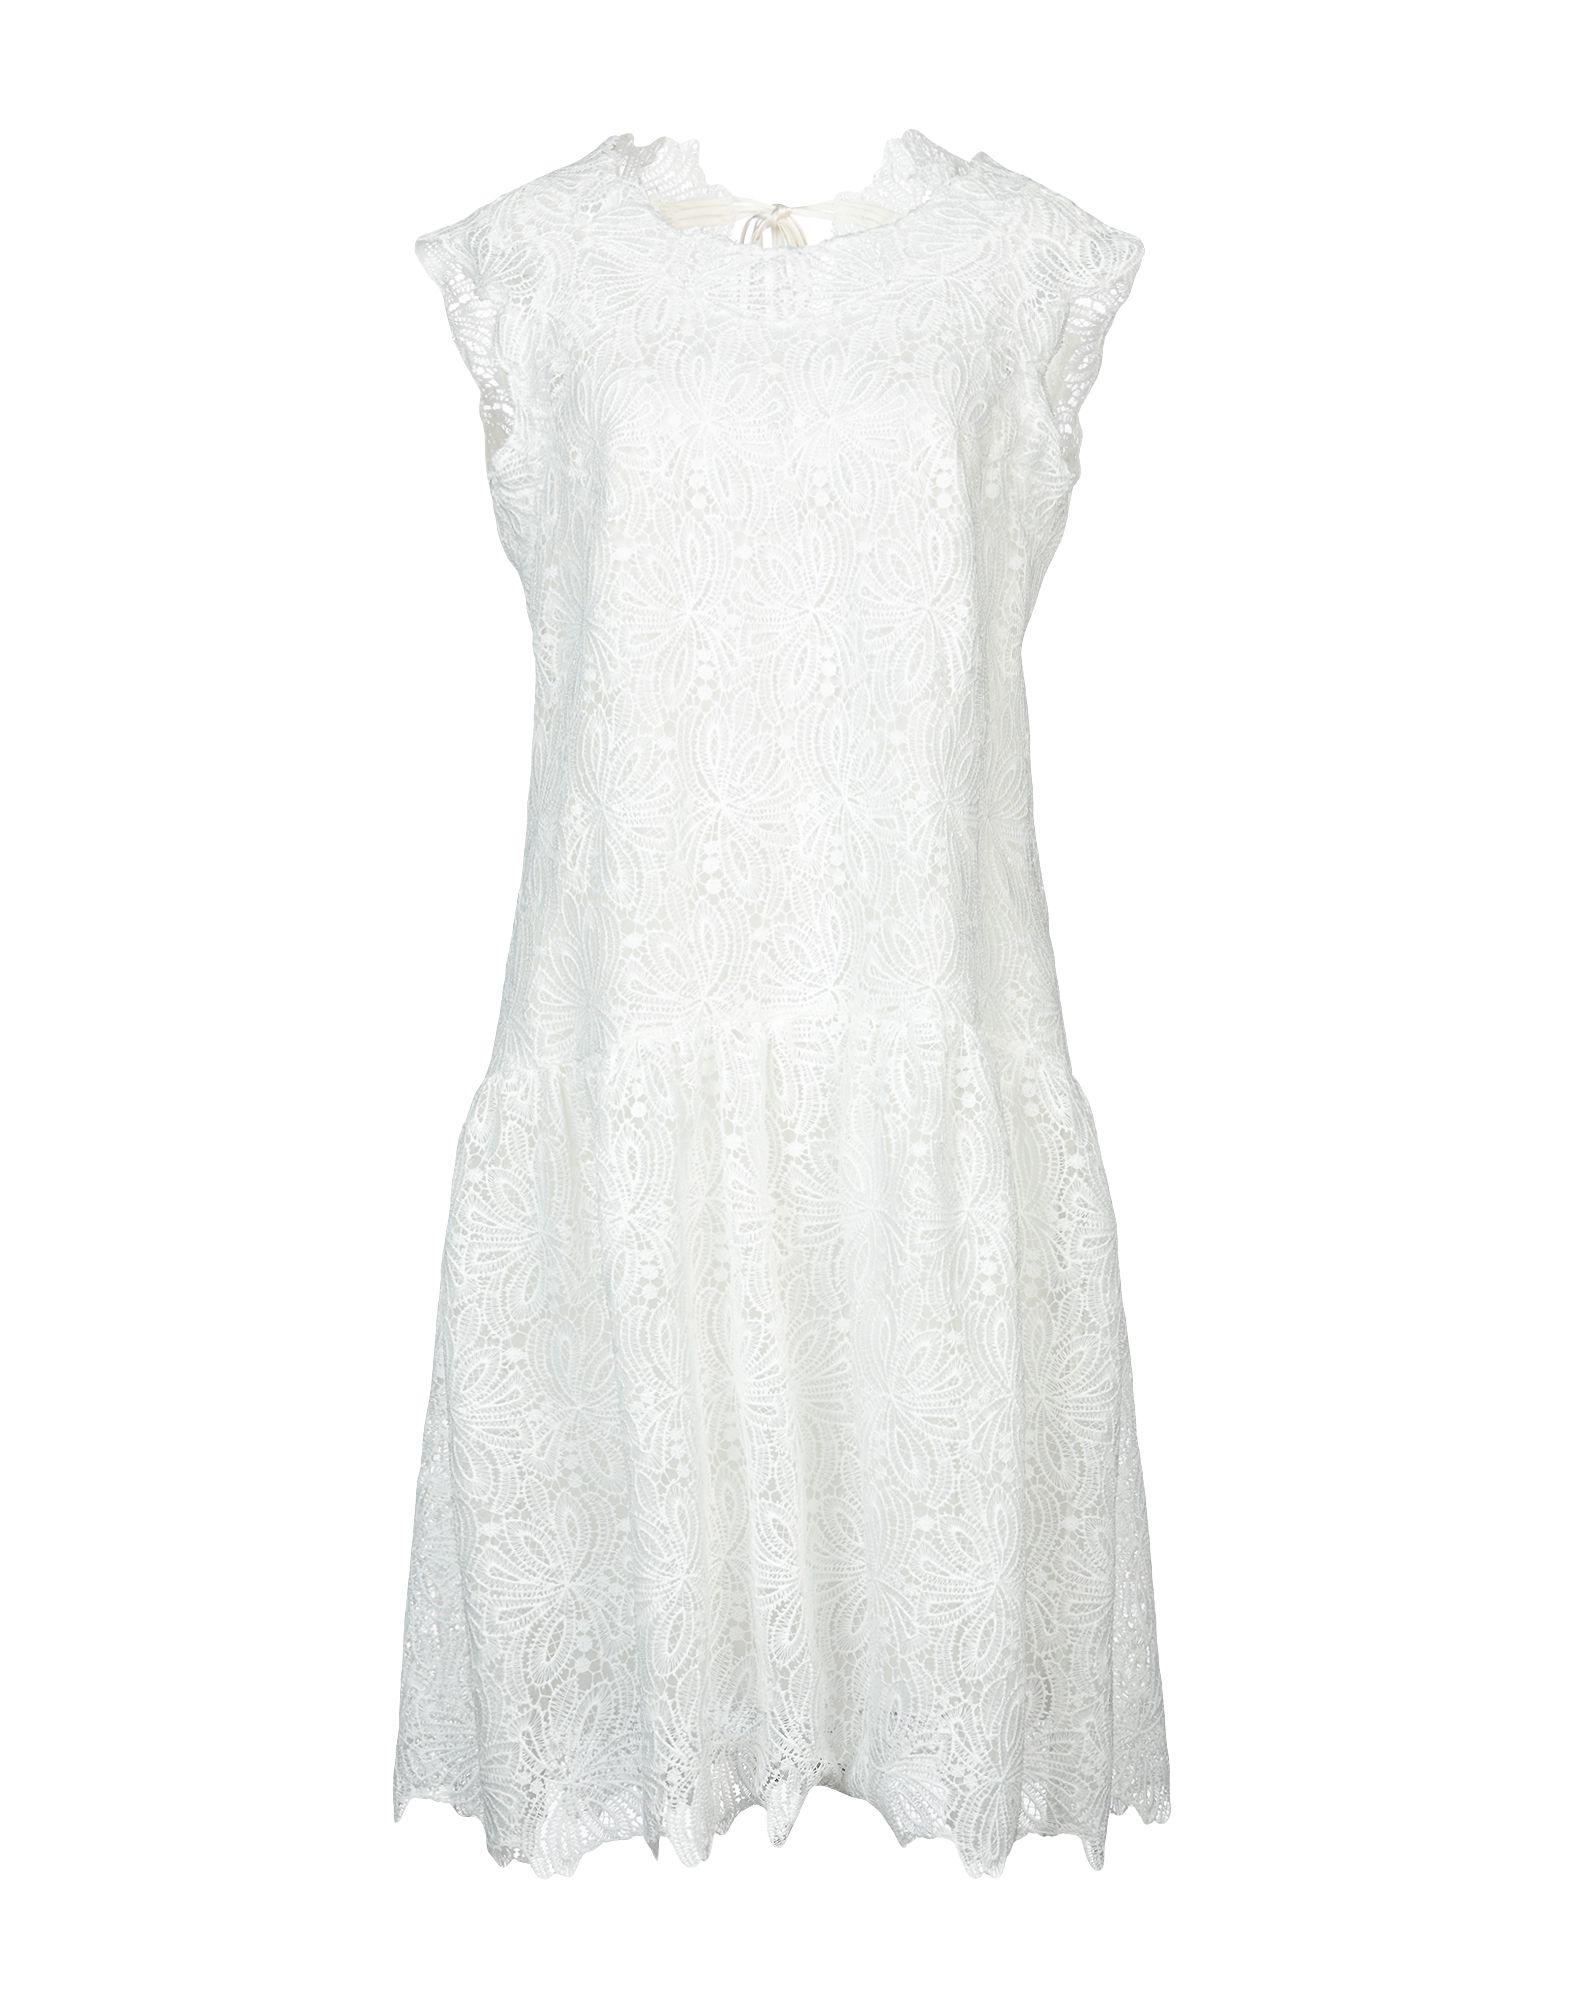 Ermanno Scervino Synthetic Knee-length Dress in White - Lyst